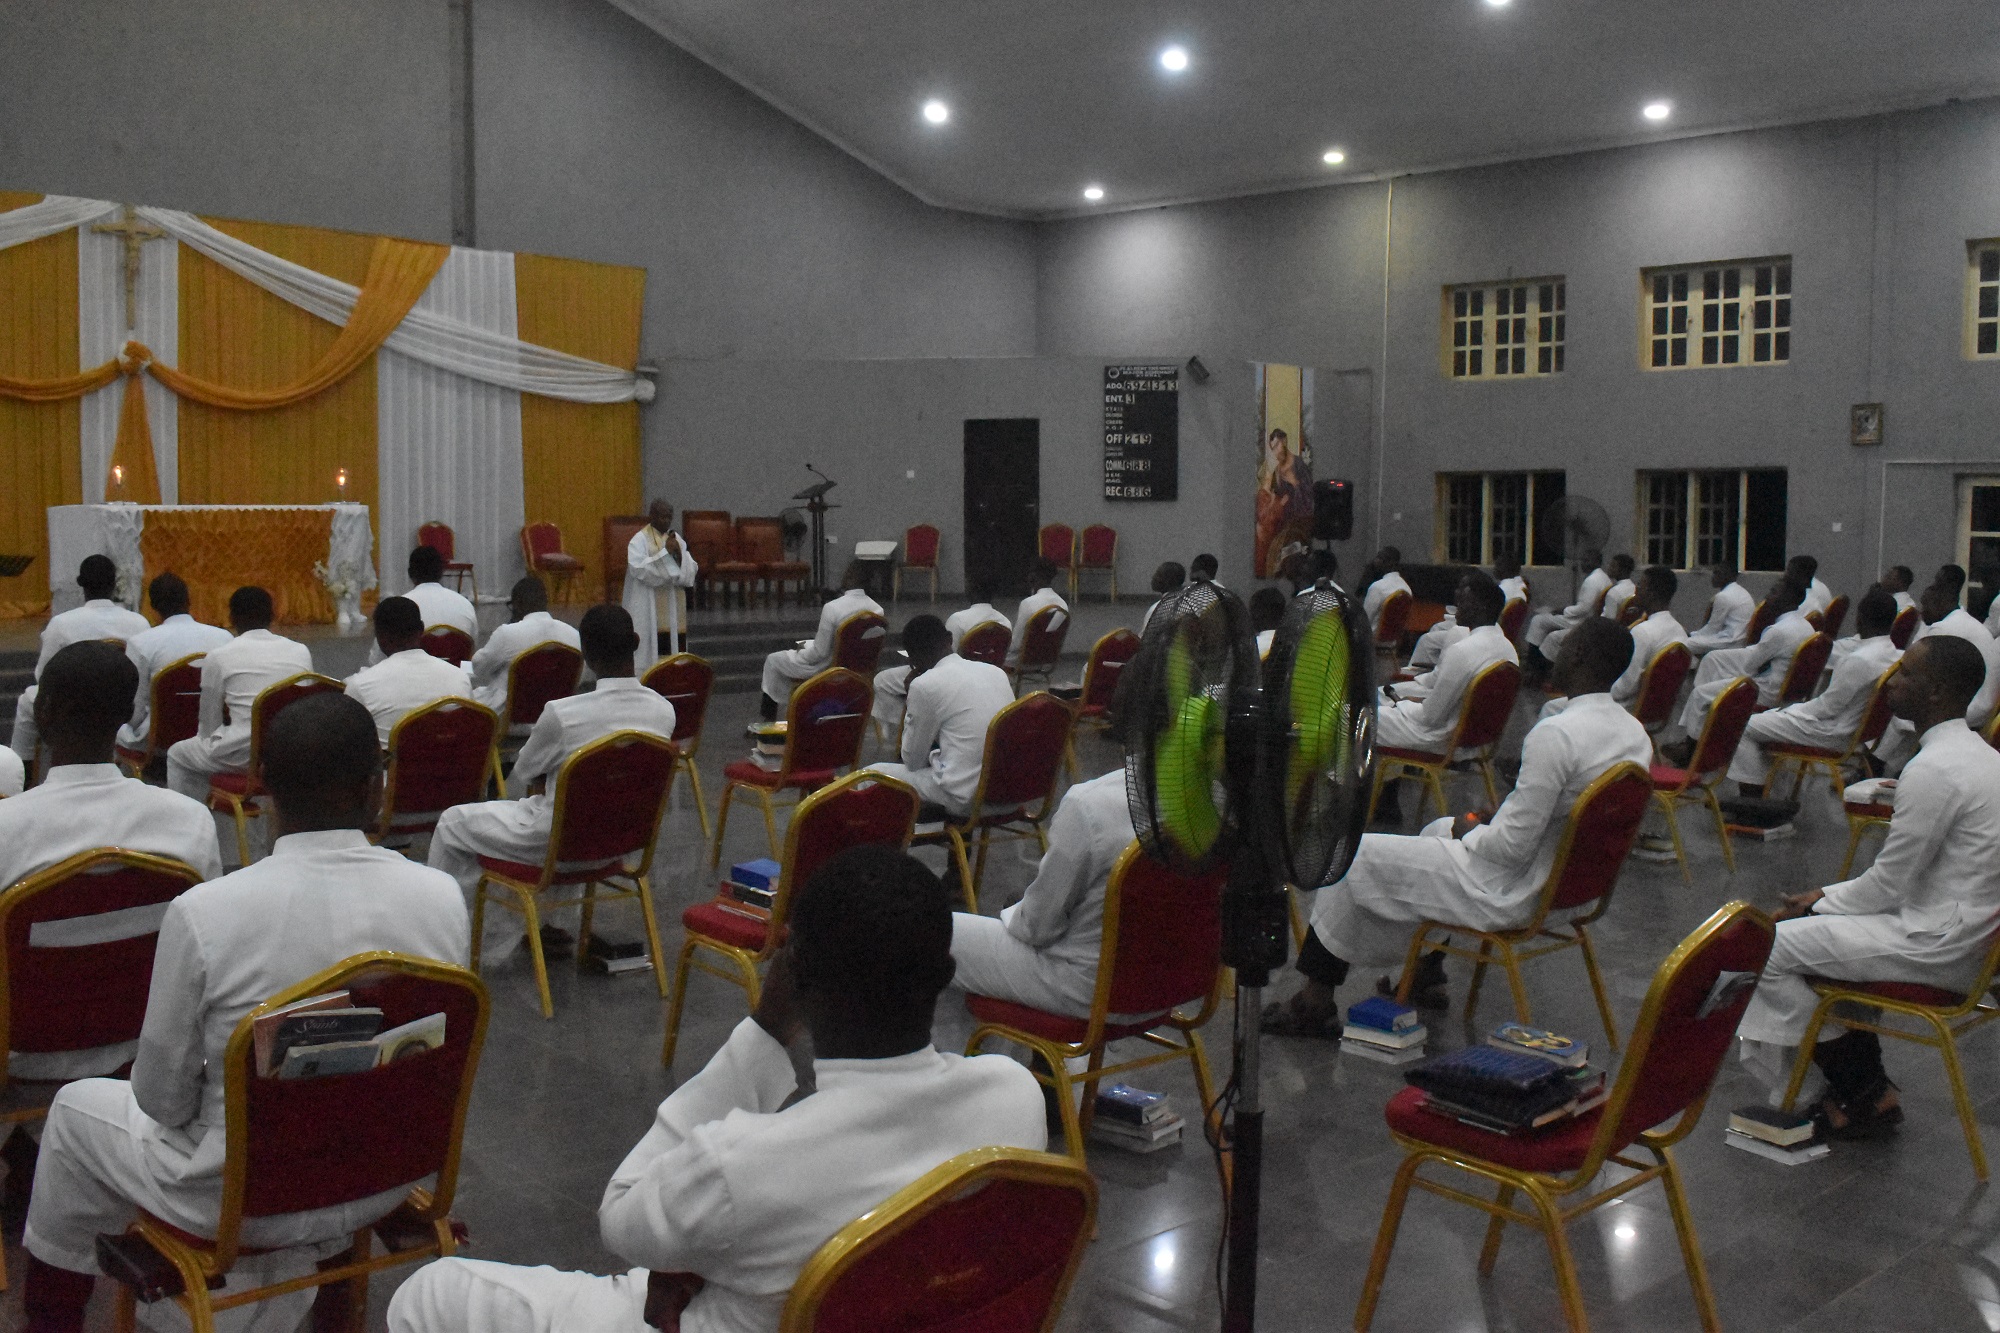 NACATHS HOLDS HER FIRST SYMPOSIUM